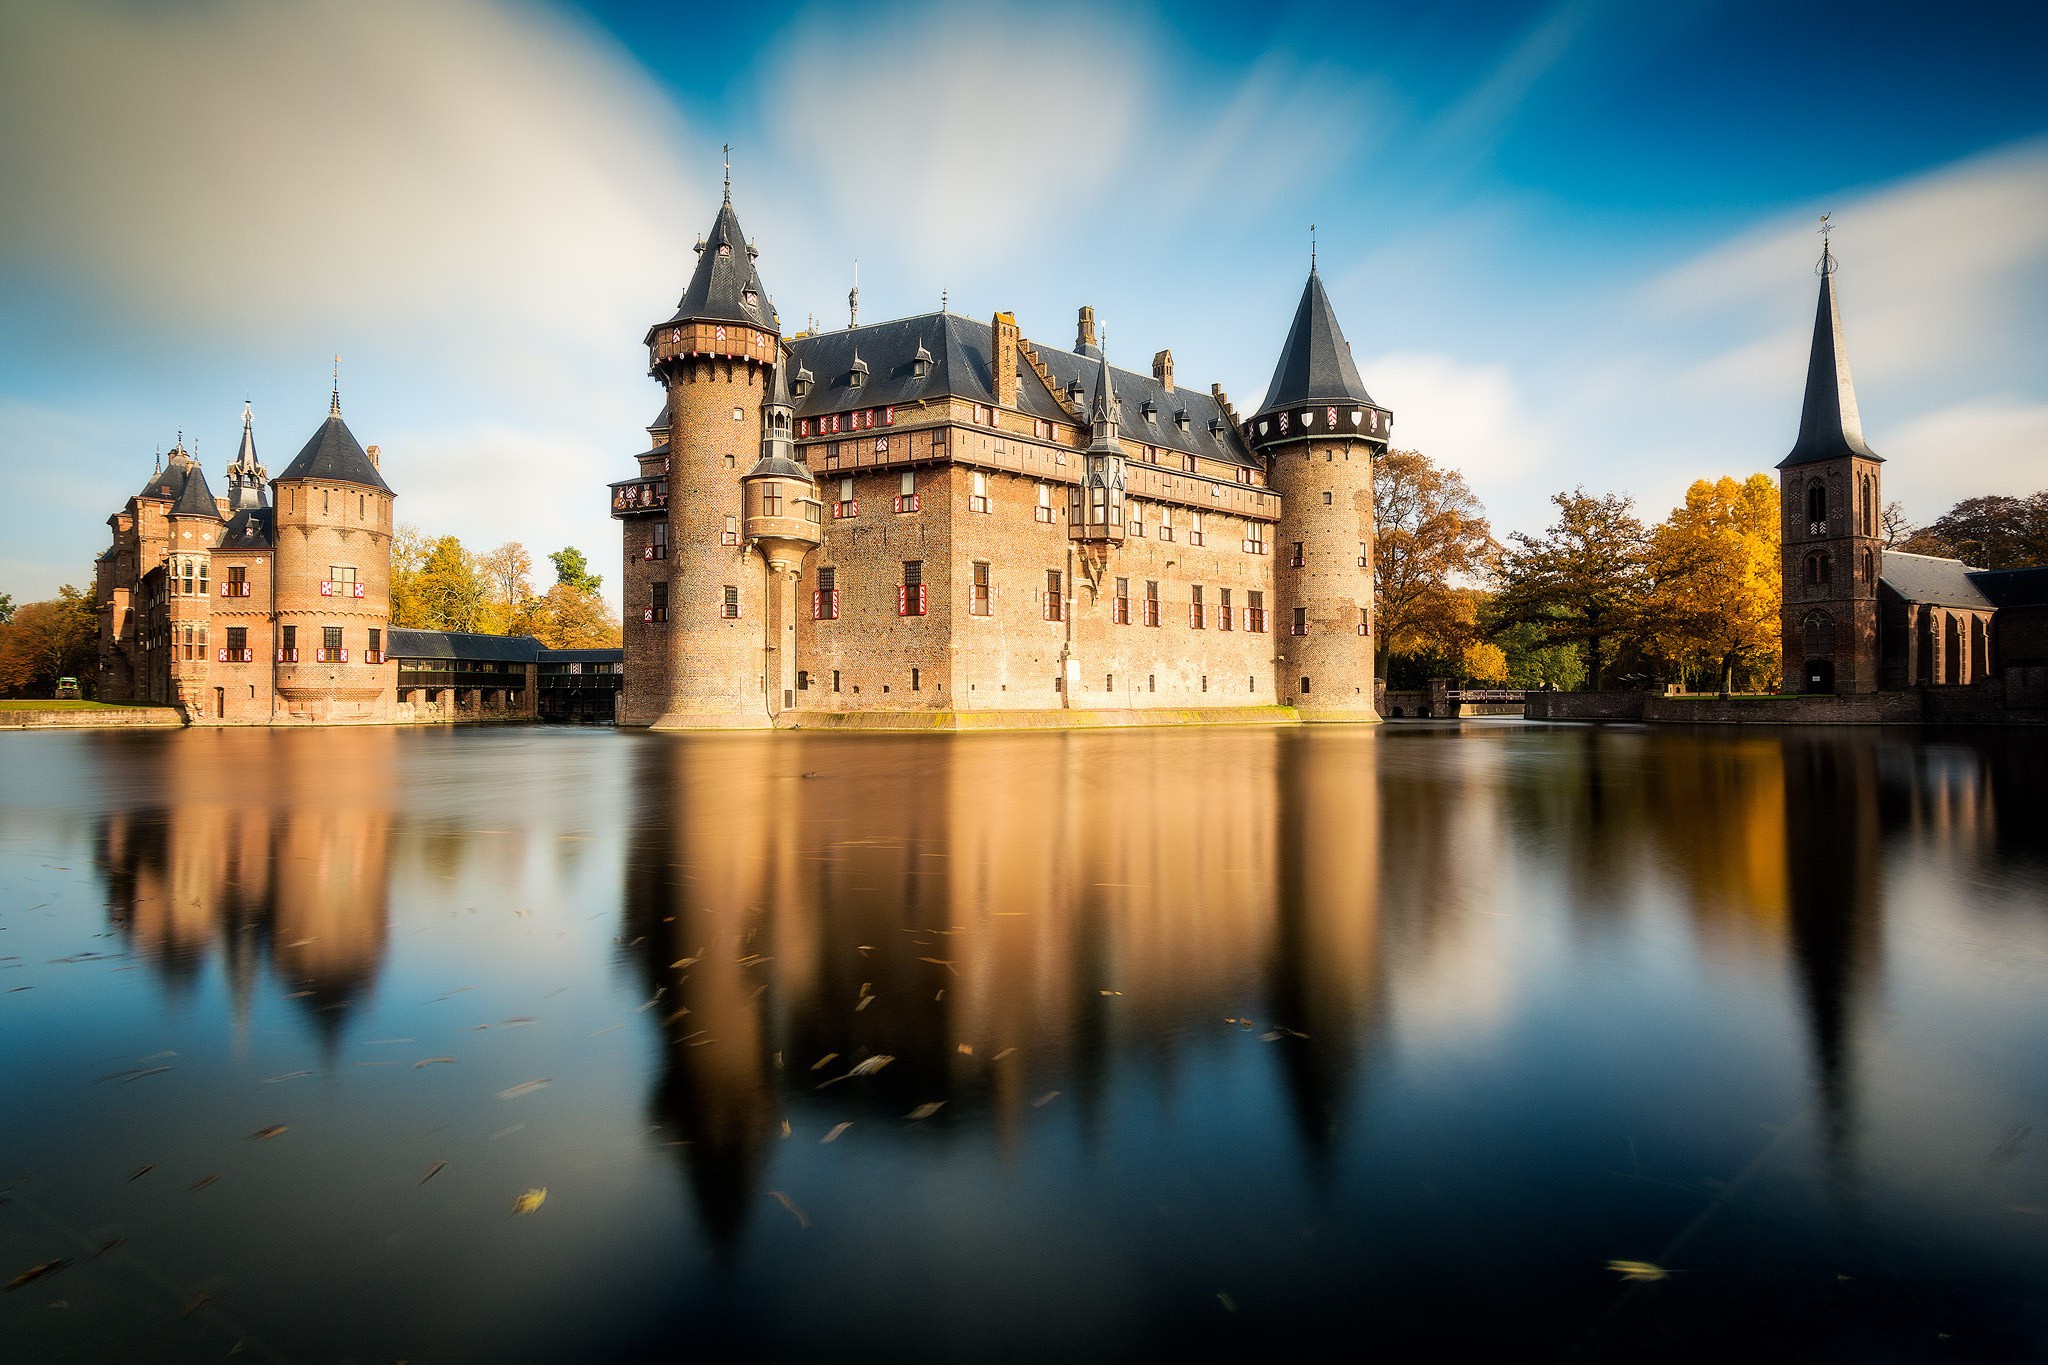 General 2048x1365 building water reflection castle Netherlands